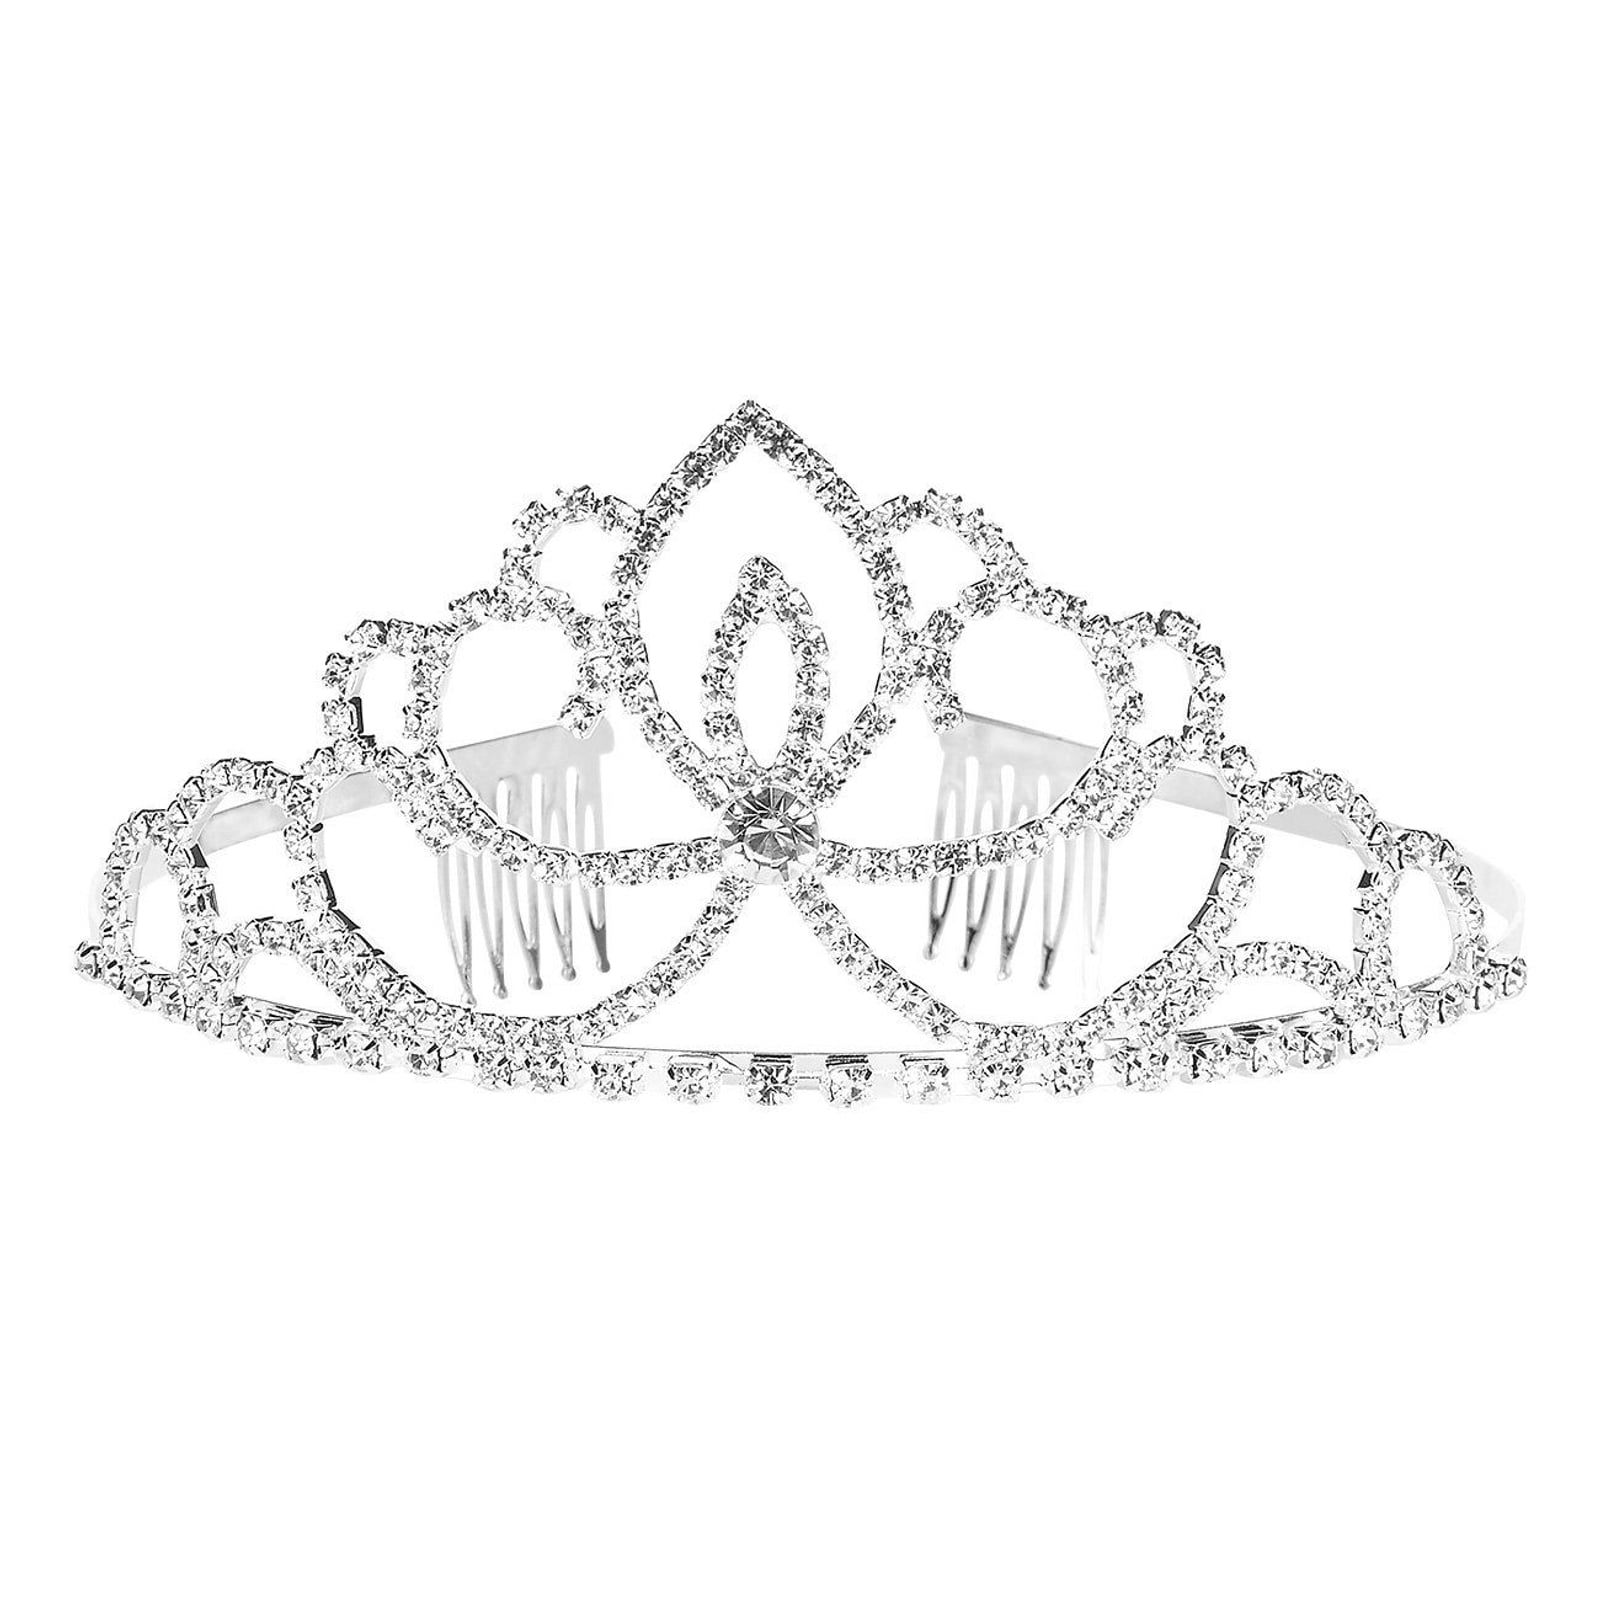 4.5" Tall Crystal Clear Rhinestones Tiara Sweet 16 w/Combs.Silver Plated Crown 